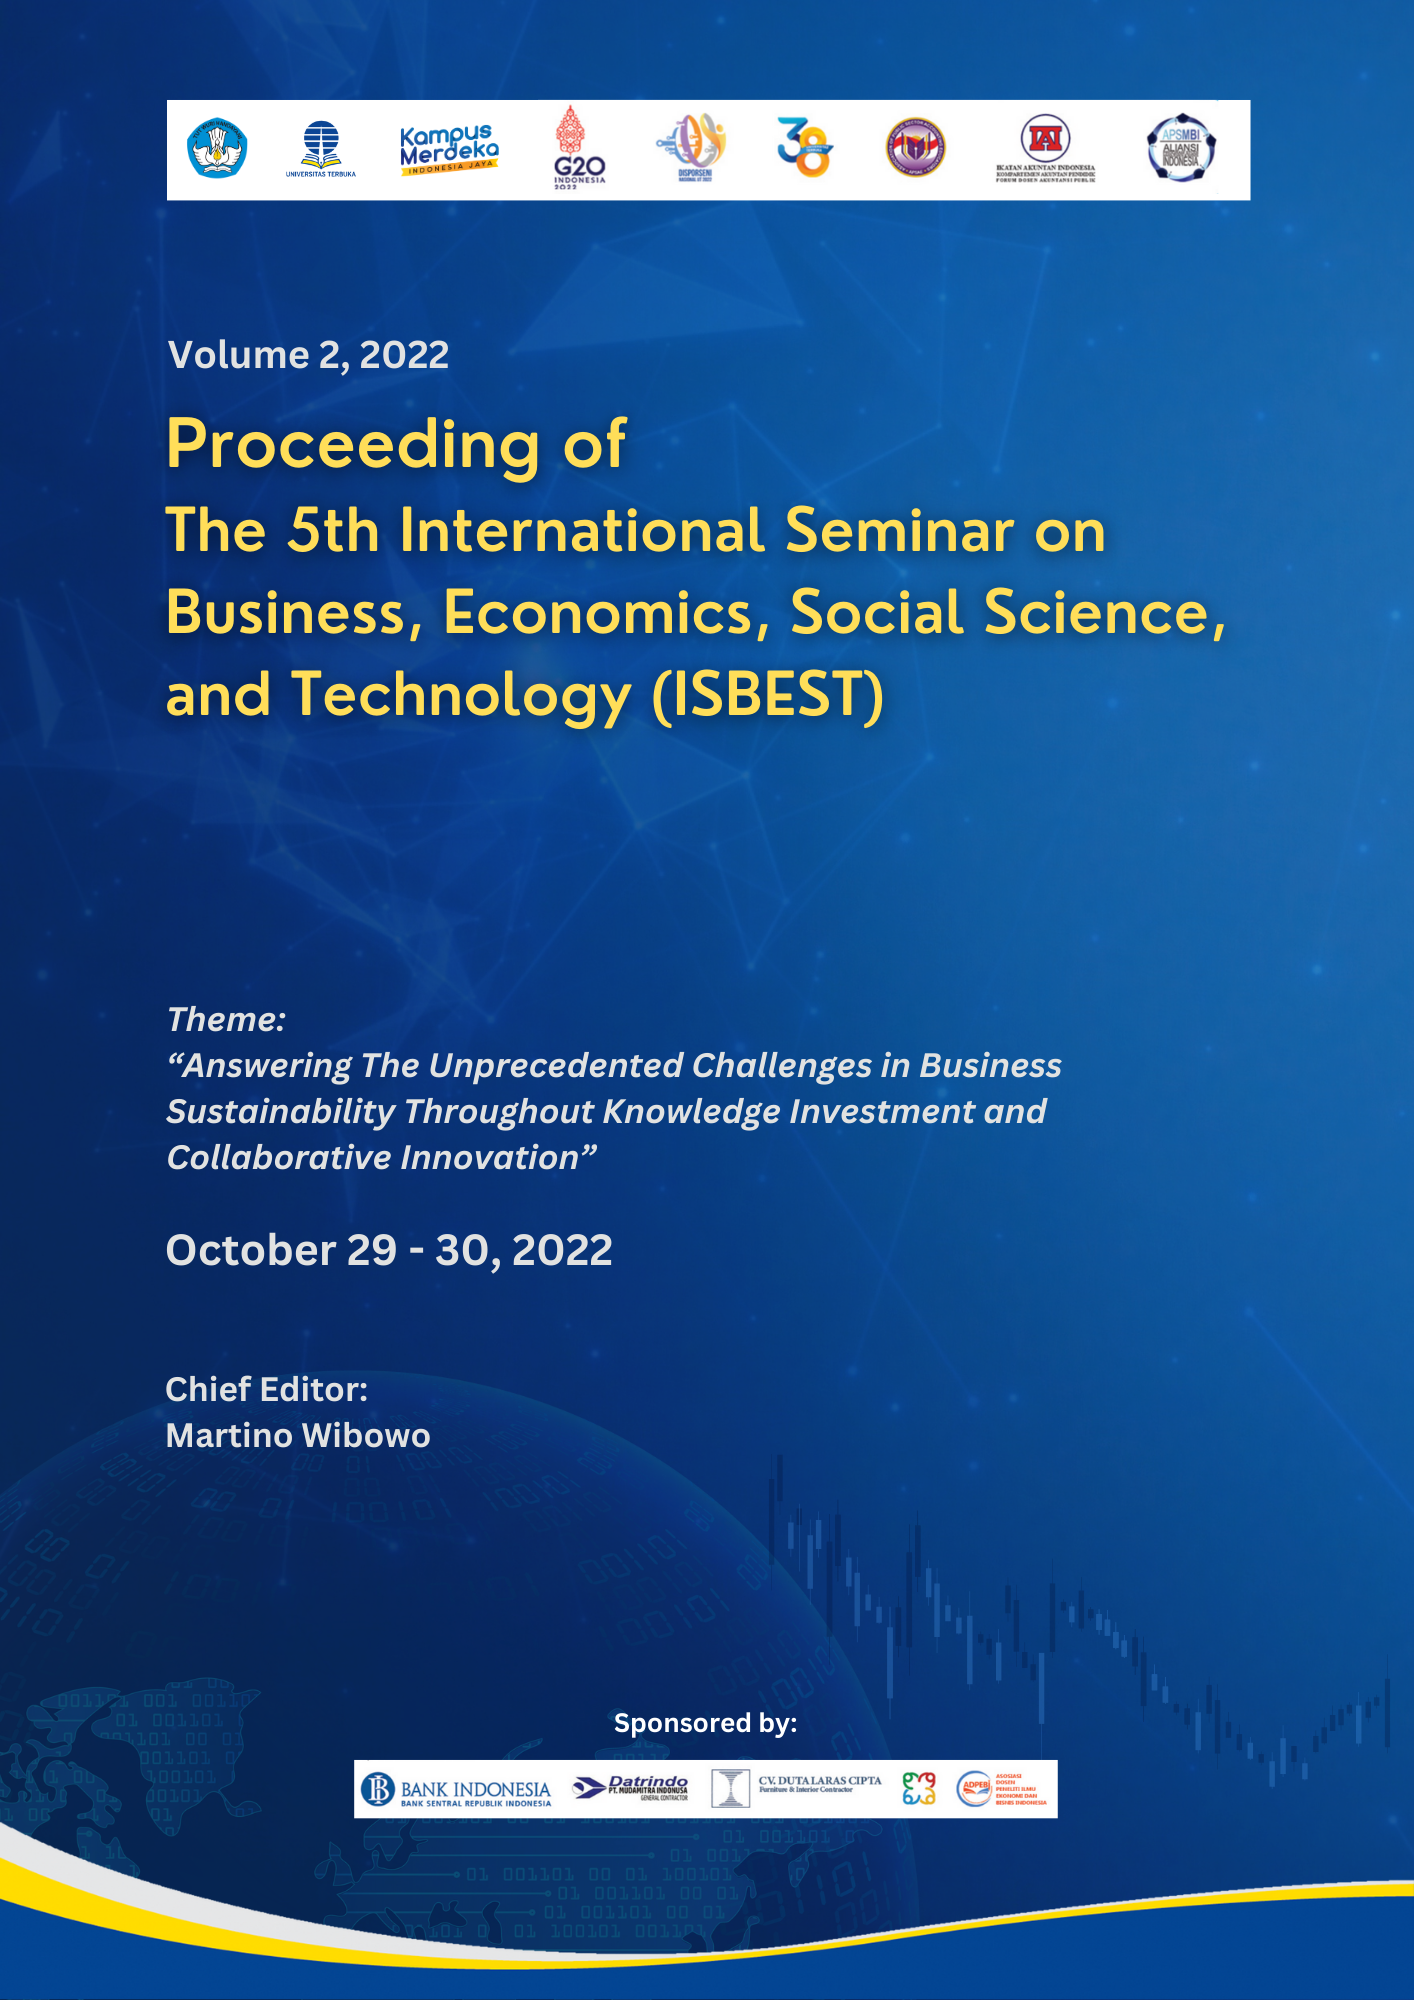                     View Vol. 2 (2022): Proceeding of The 5th International Seminar on Business, Economics, Social Science, and Technology (ISBEST)
                